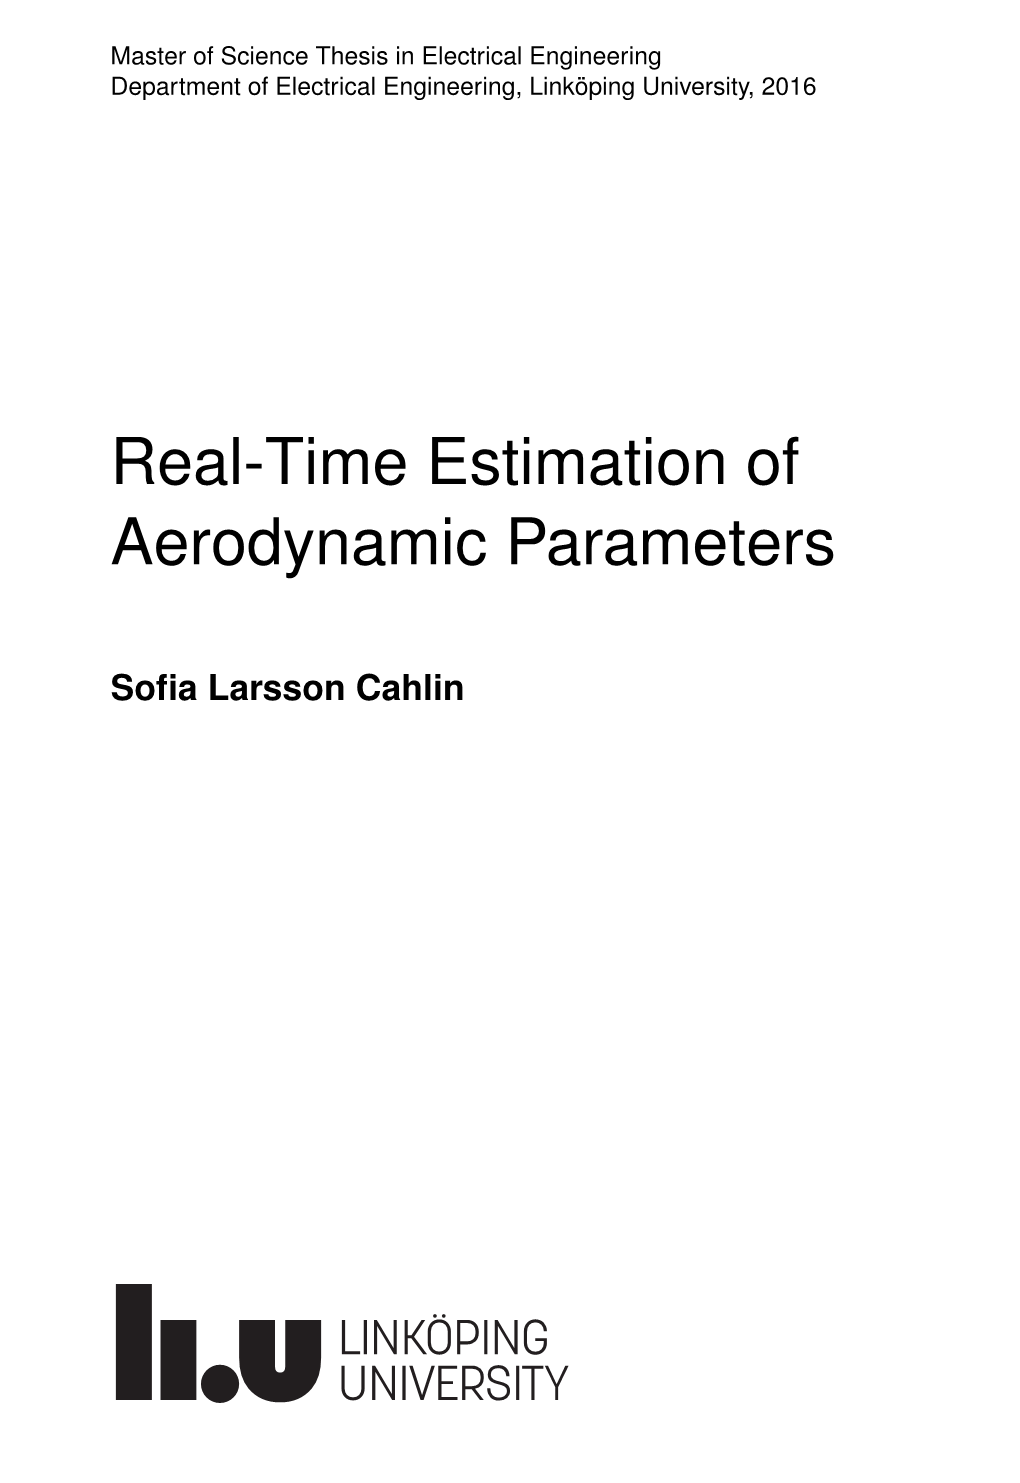 Real-Time Estimation of Aerodynamic Parameters